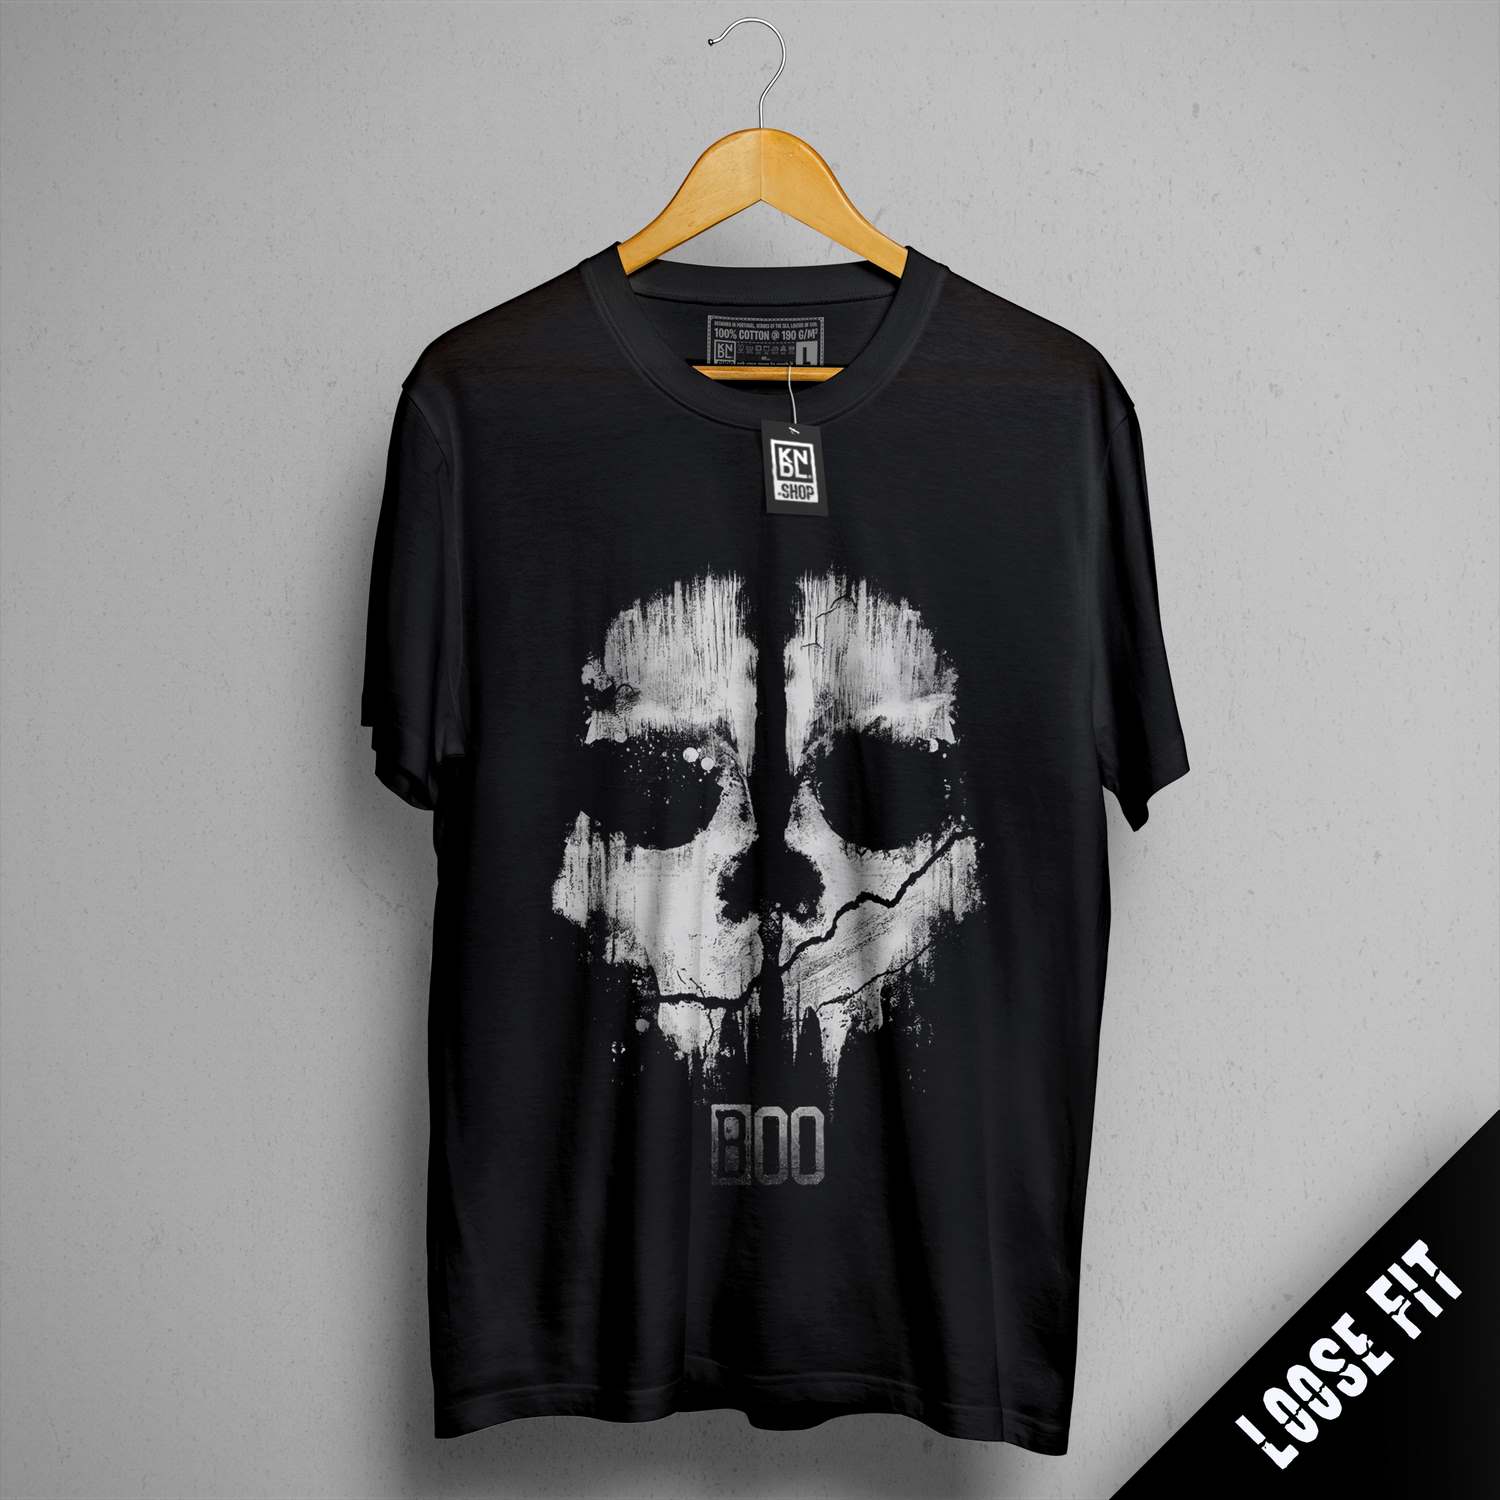 a black t - shirt with a white skull on it